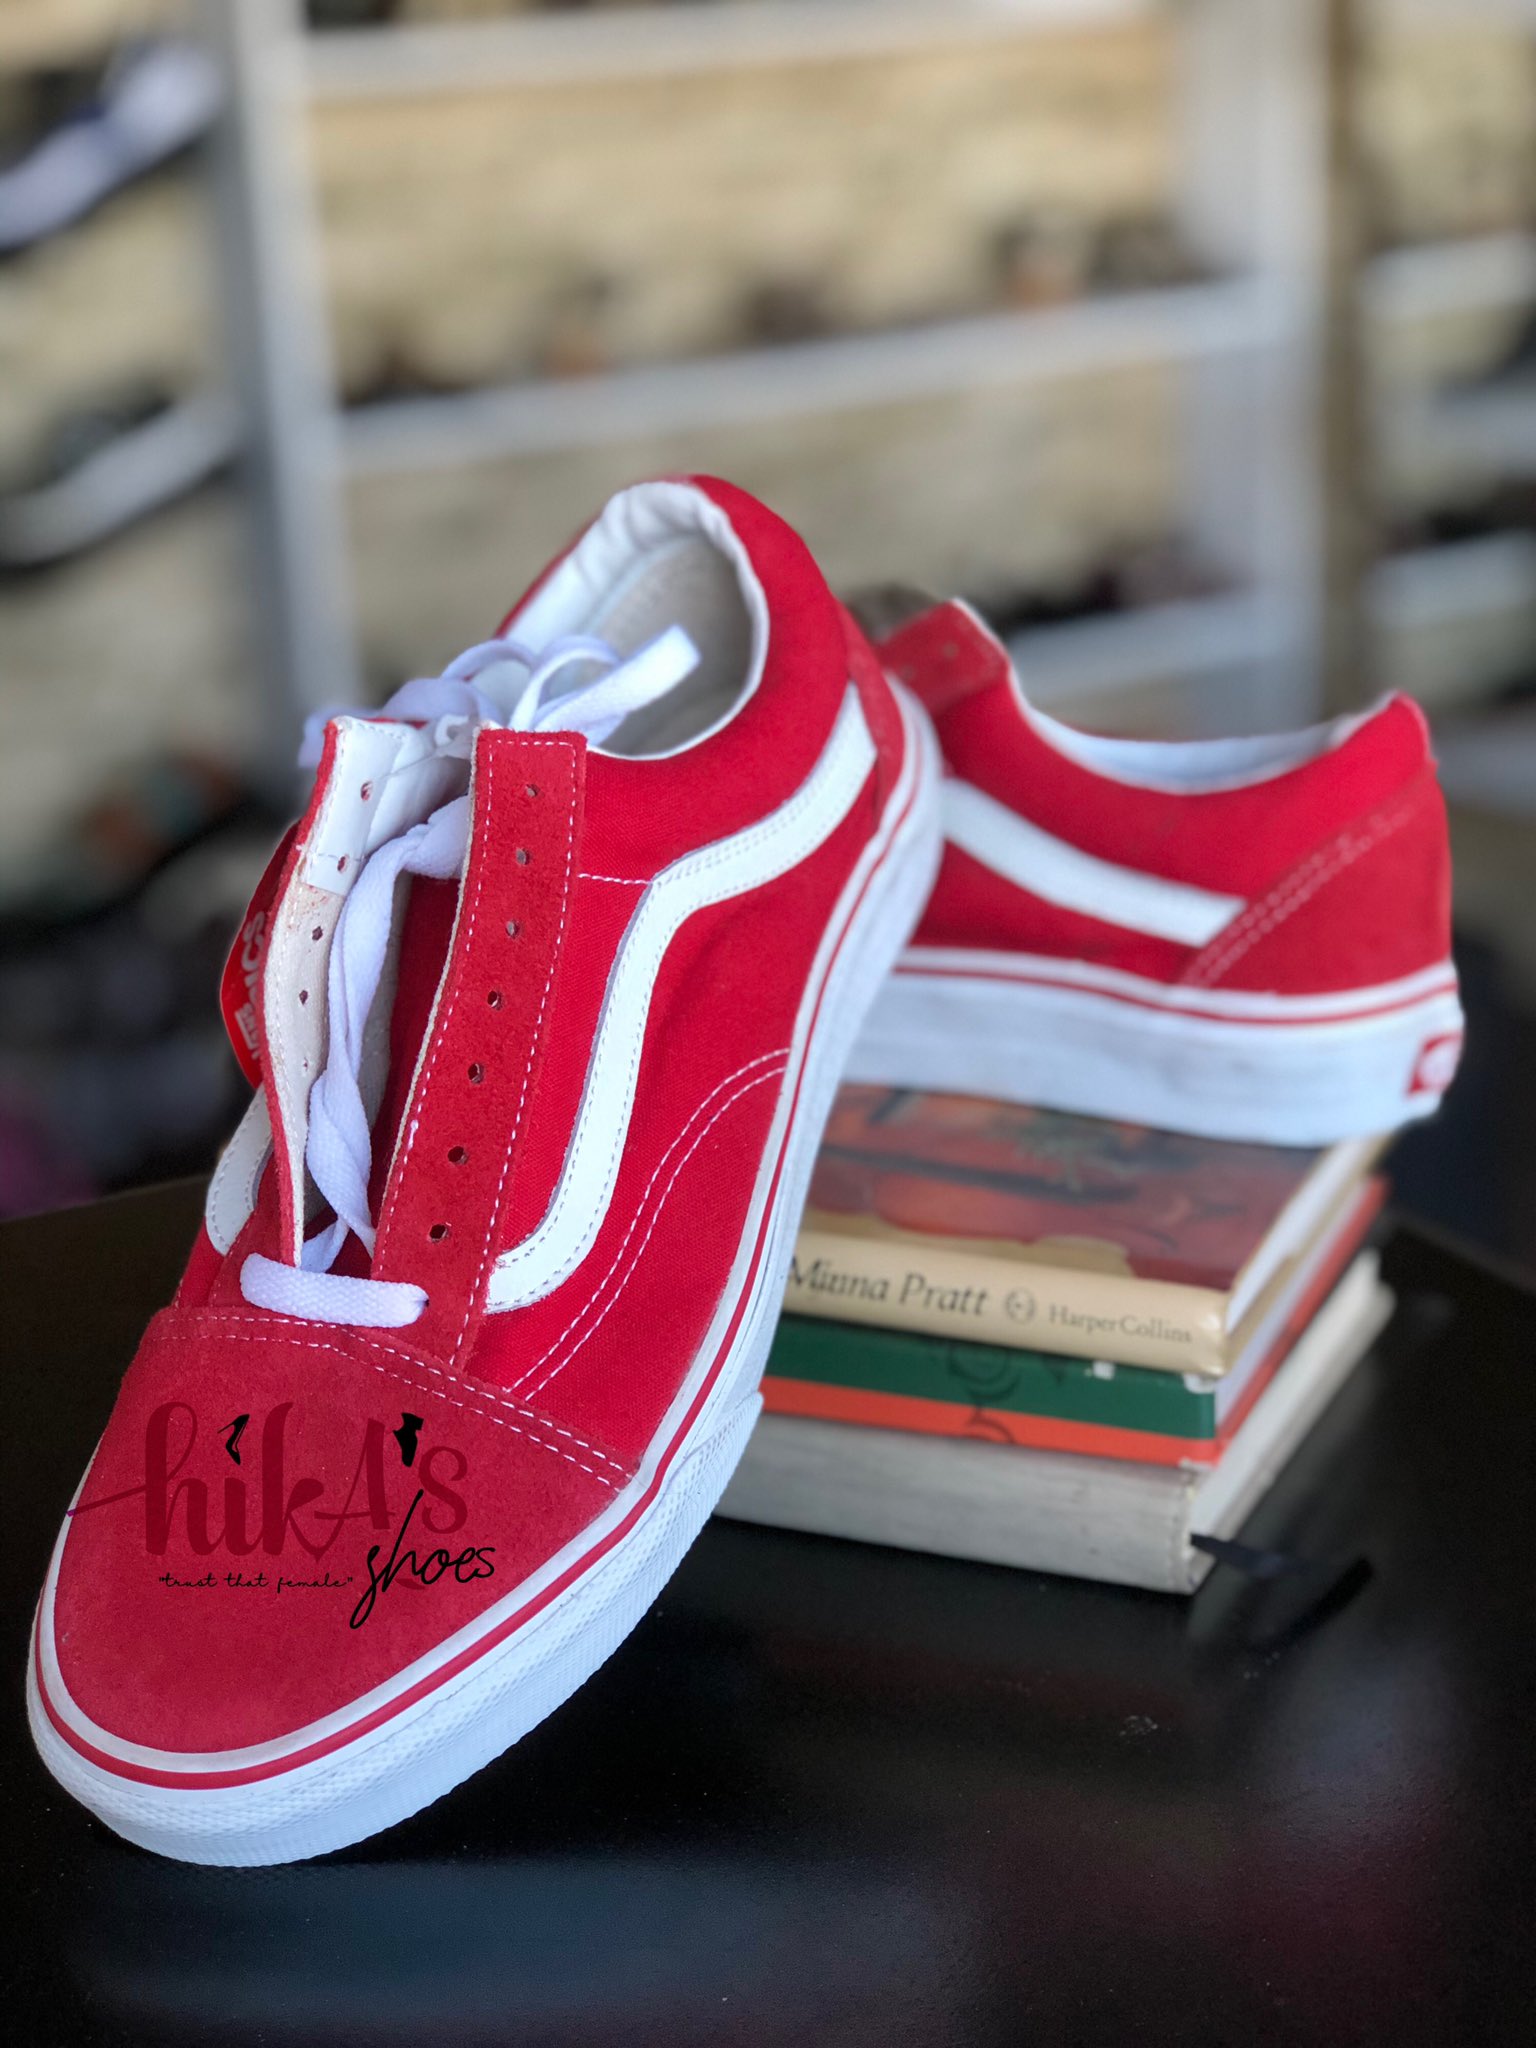 Heer tanker Gelukkig is dat Hika Lyimo on Twitter: "Available!! 🔥🔥 1: size 45 price: 70,000/= 2: size  42 price: 65,000/= 3: vans size 42 price: 65,000/= 4: adidas ultra boost  (female) size 37, price: 35,000/= #hikasshoes https://t.co/6ZhBiWRhUd" /  Twitter